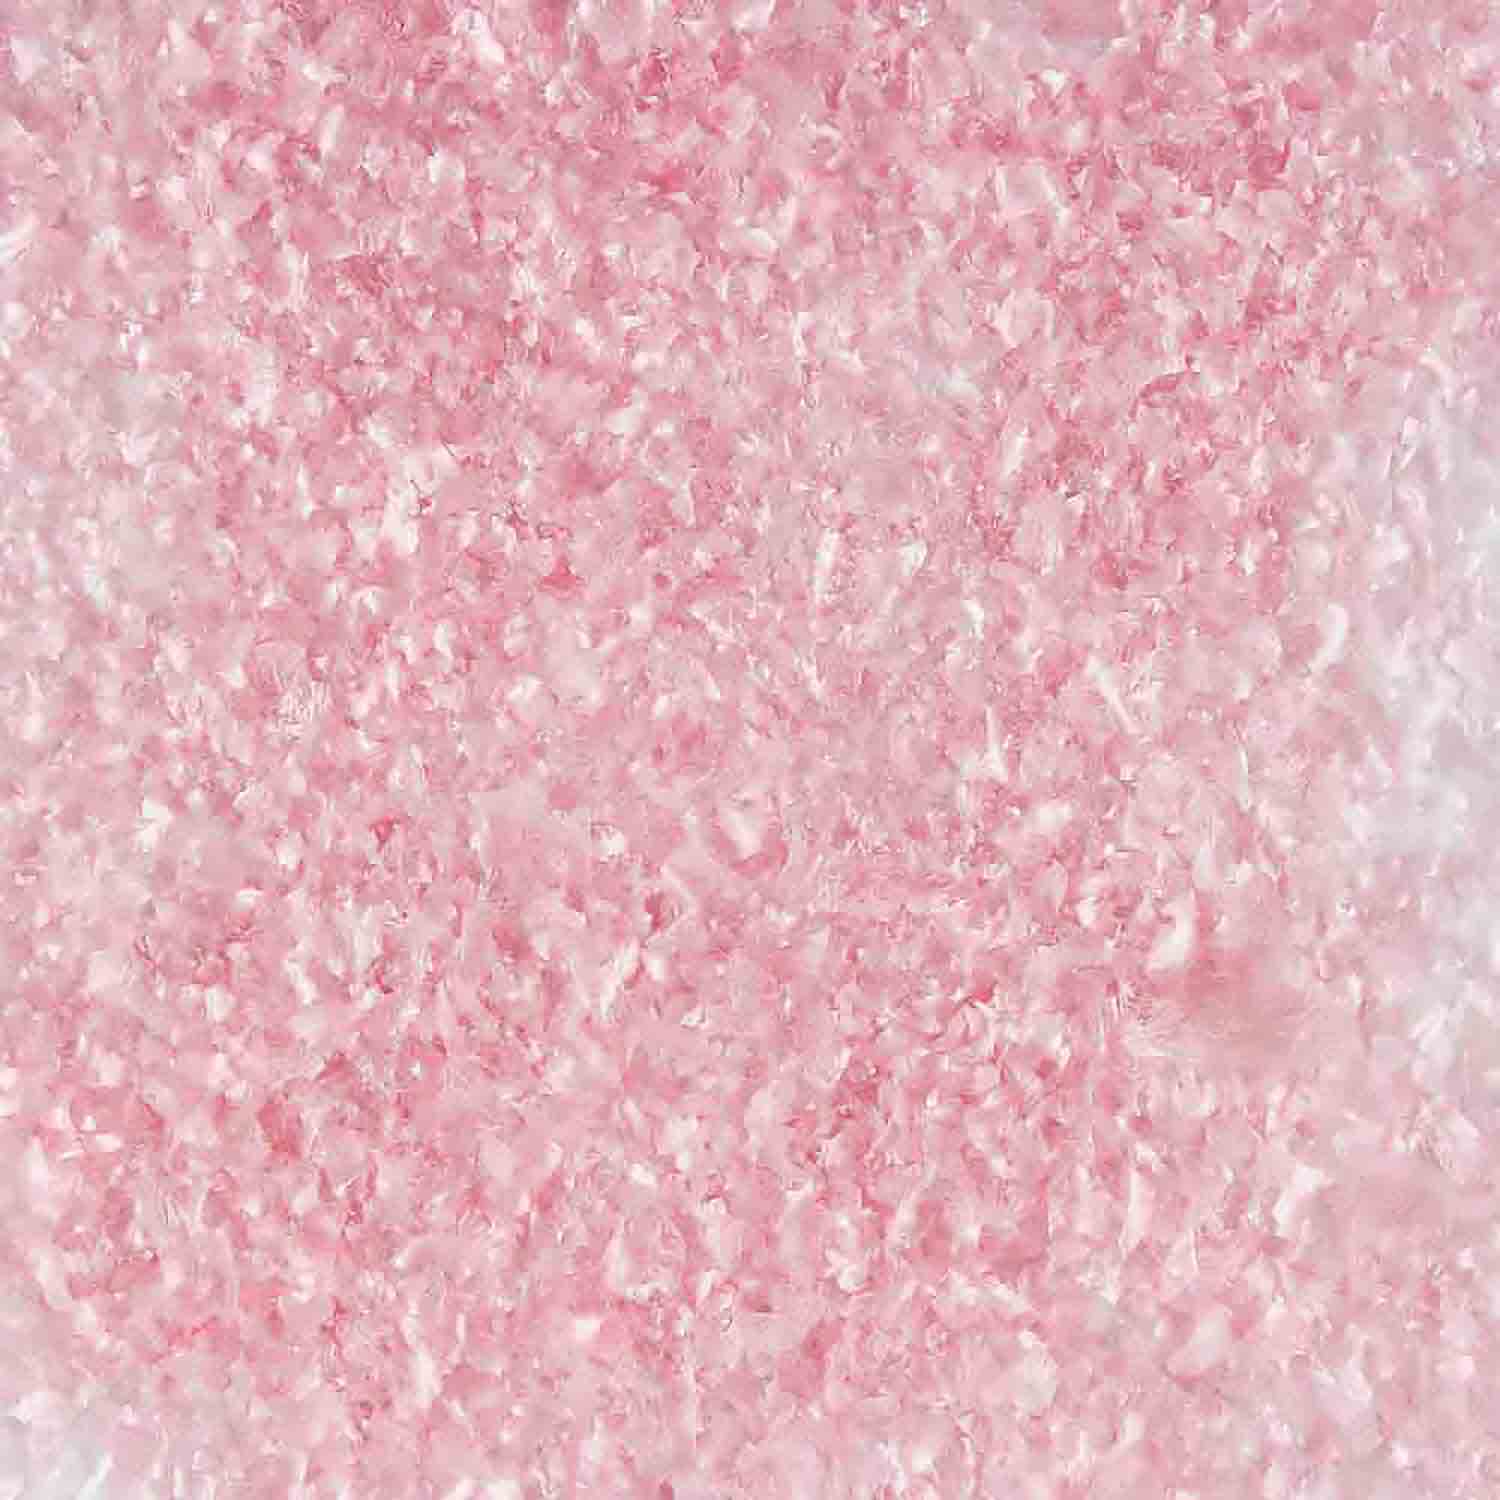 Sweet Evas Edible Glitter Light Pink: Shimmer / Sparkle / Flakes for Cakes and C